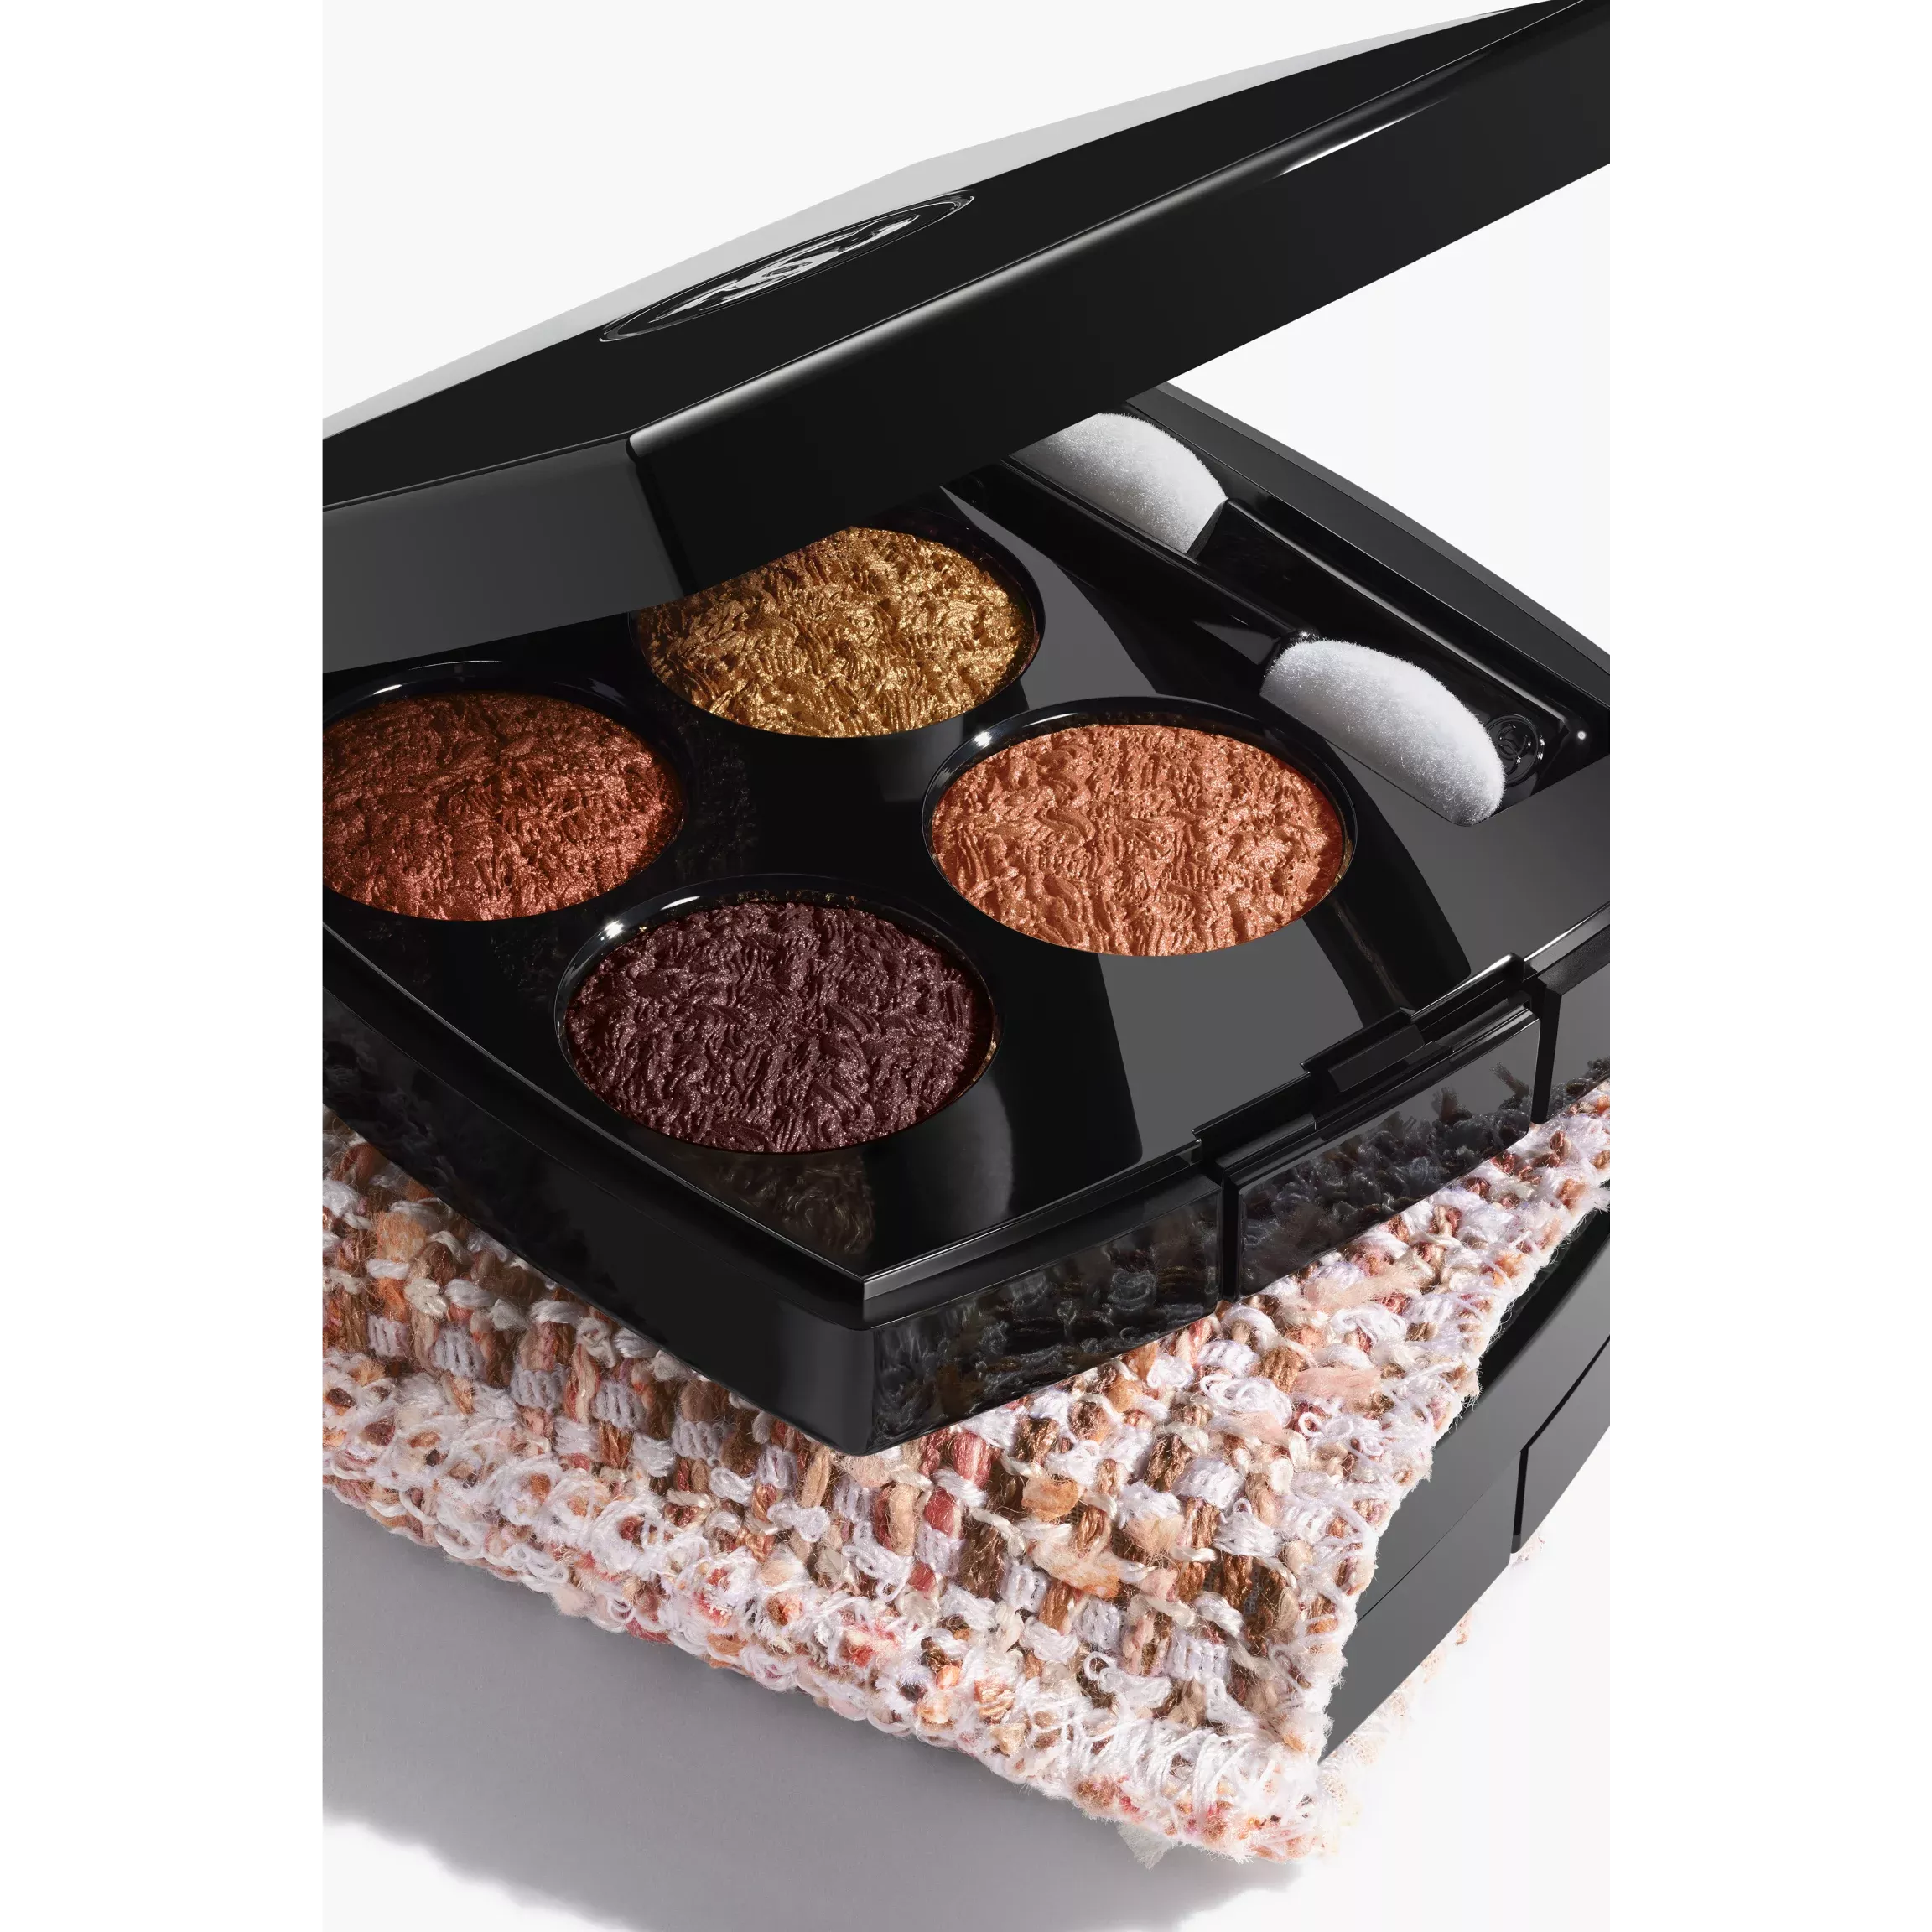 LES 4 OMBRES TWEED - Eyeshadow palettes